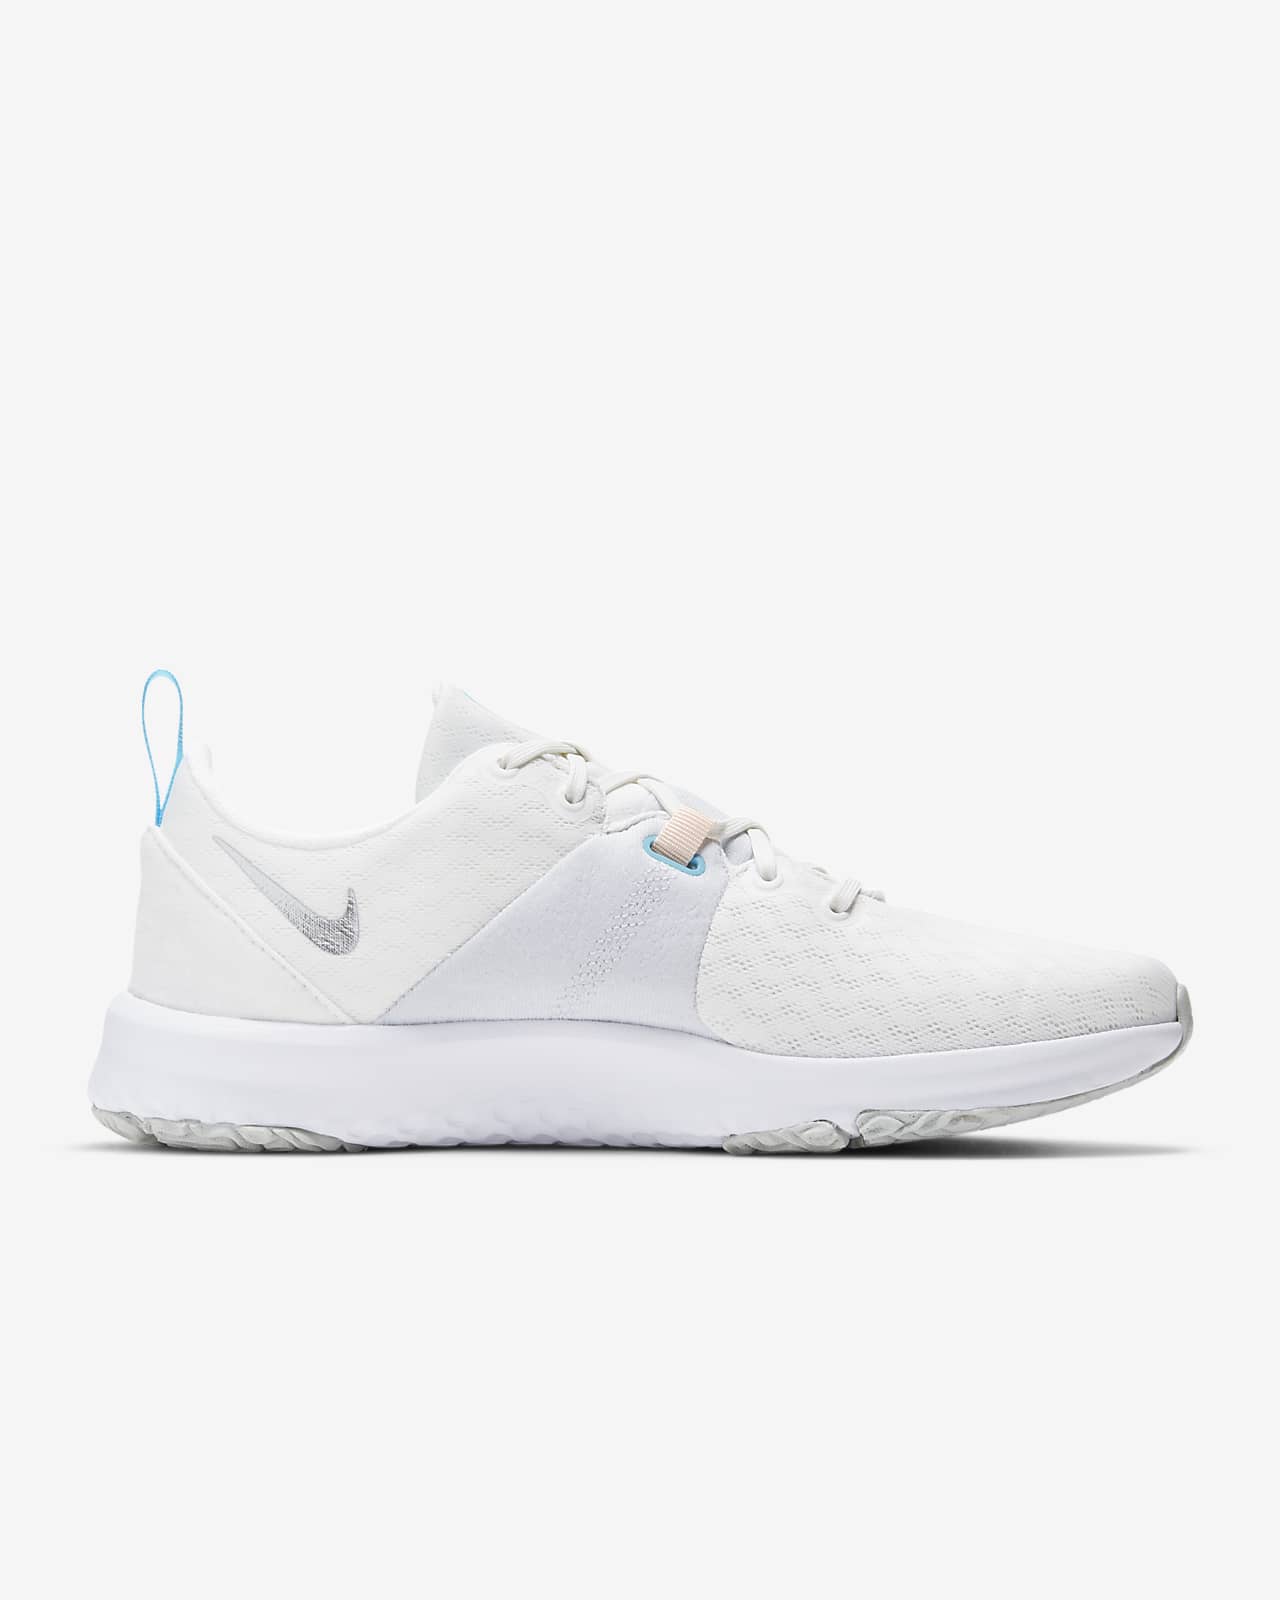 nike city trainer 2 women's review